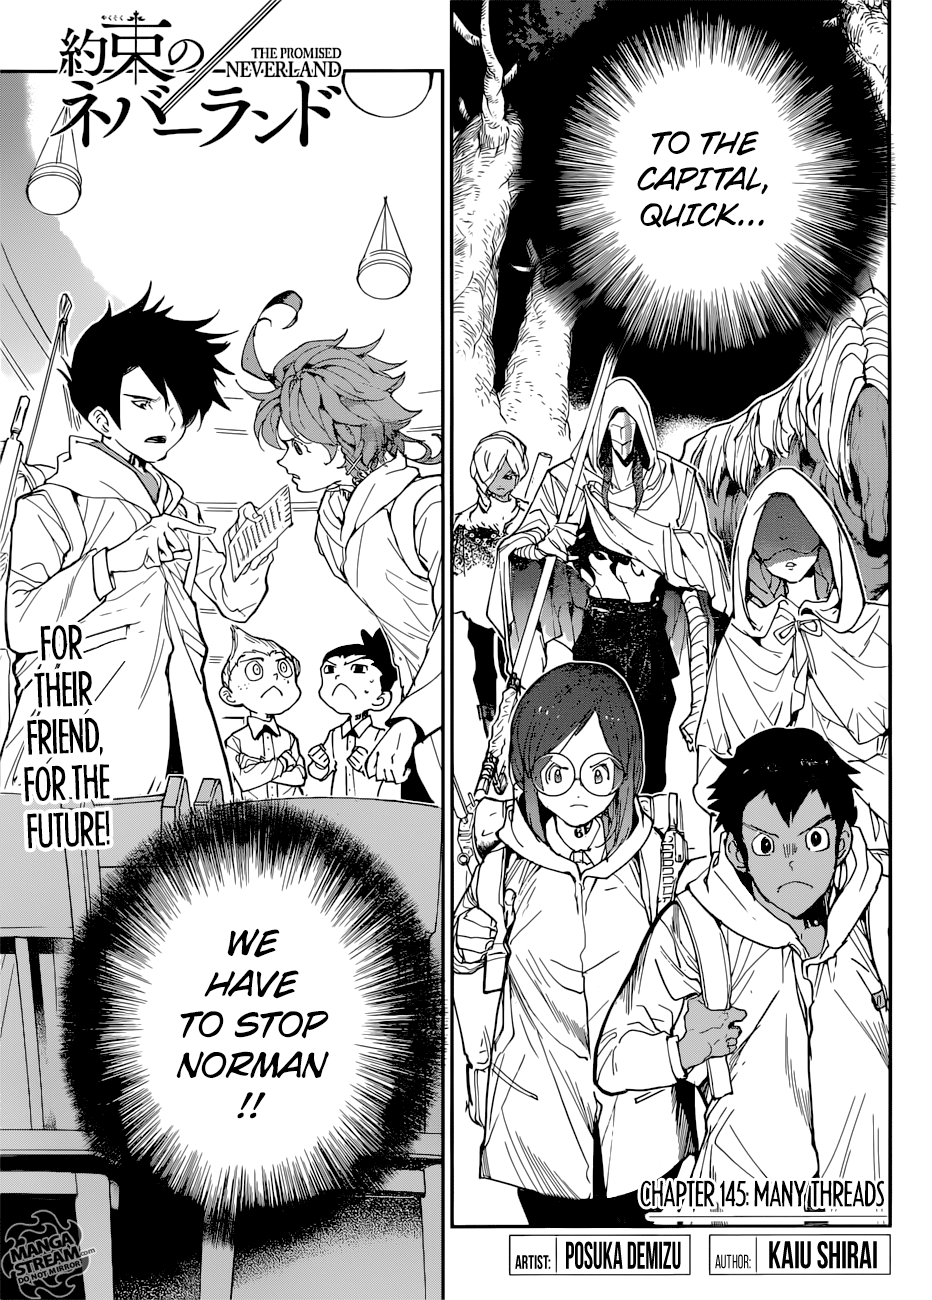 The Promised Neverland 145